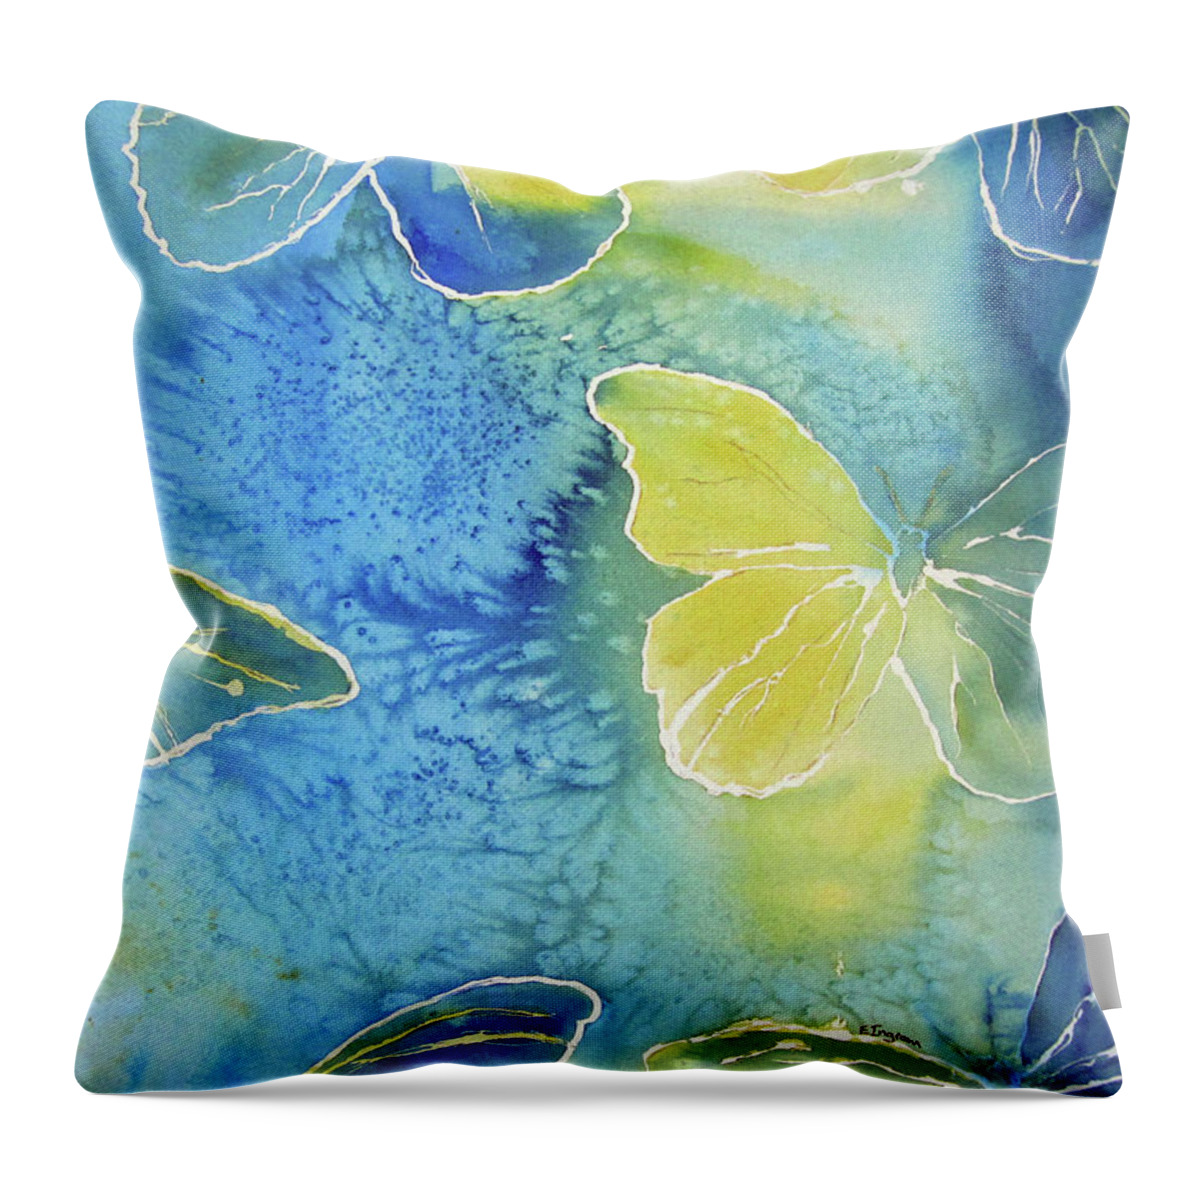 Butterflies Throw Pillow featuring the painting Into the Light by Elvira Ingram